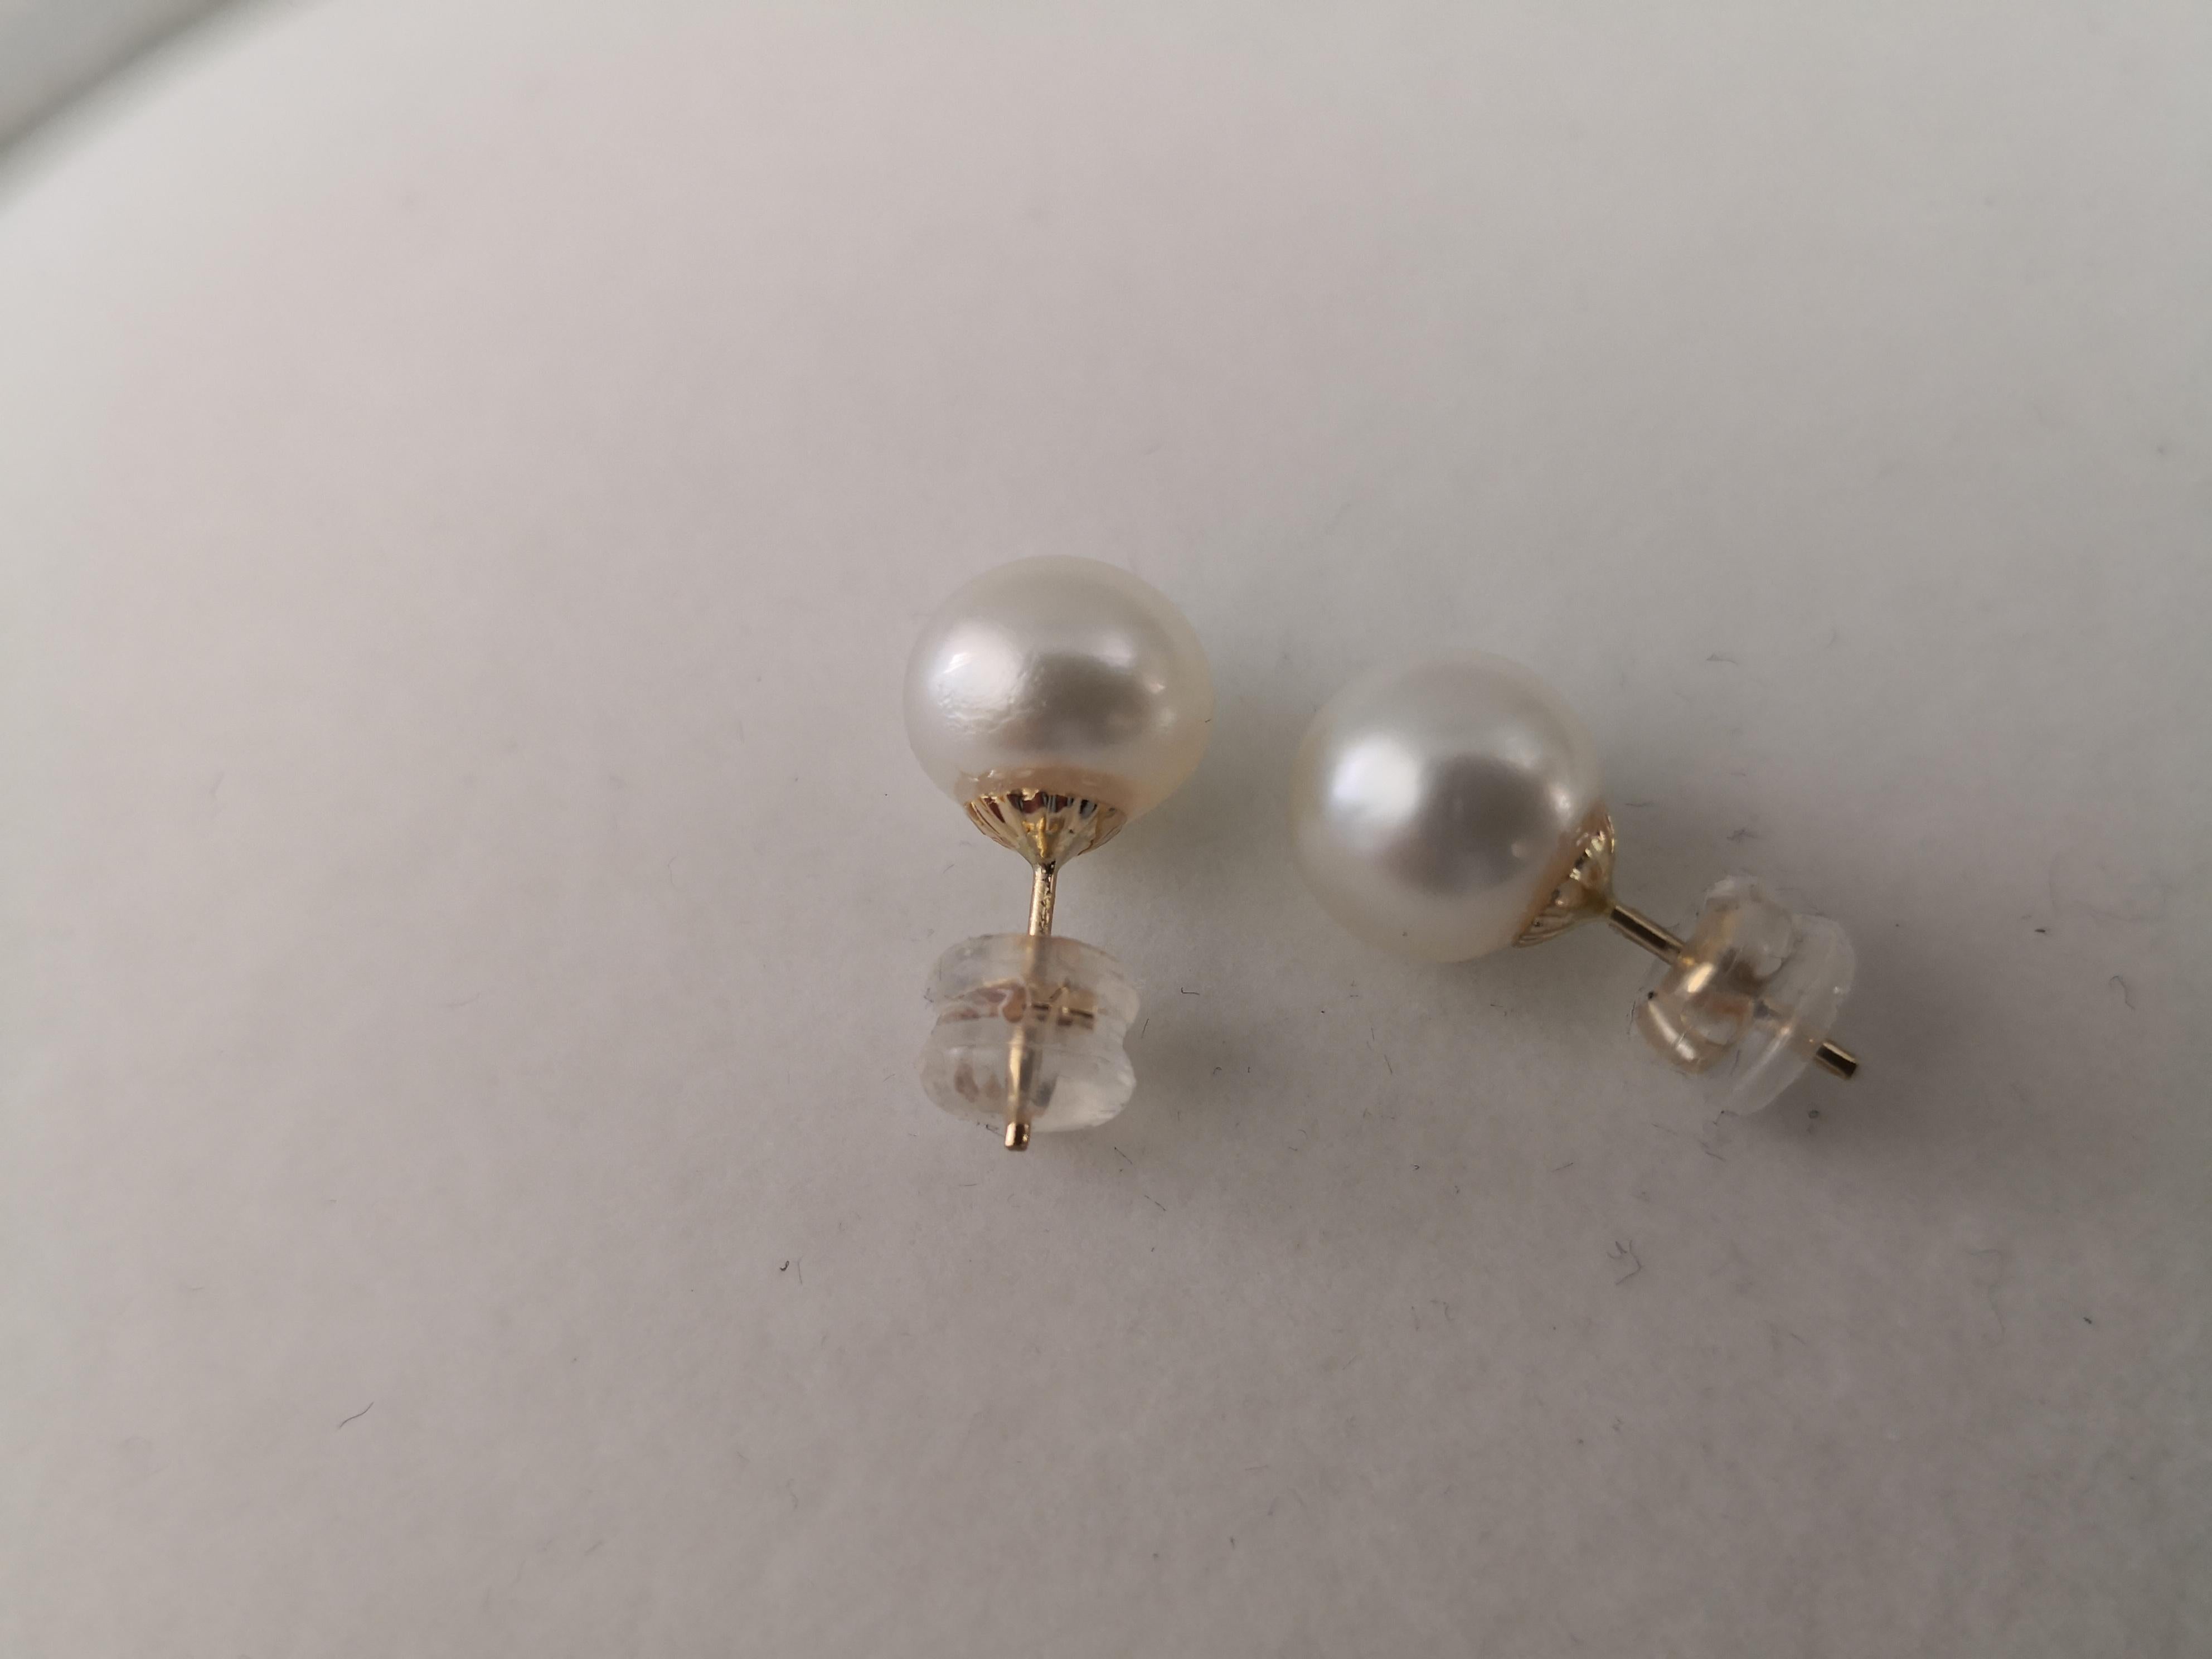 - Natural Color South Sea Pearls earrings

- Origin: Australian ocean waters

- Produced by Pinctada Maxima Oyster

- 18K Yellow Gold mounting

- Size of Pearls 10  mm of diameter

- Pearls of near round shape

- High natural luster and orient